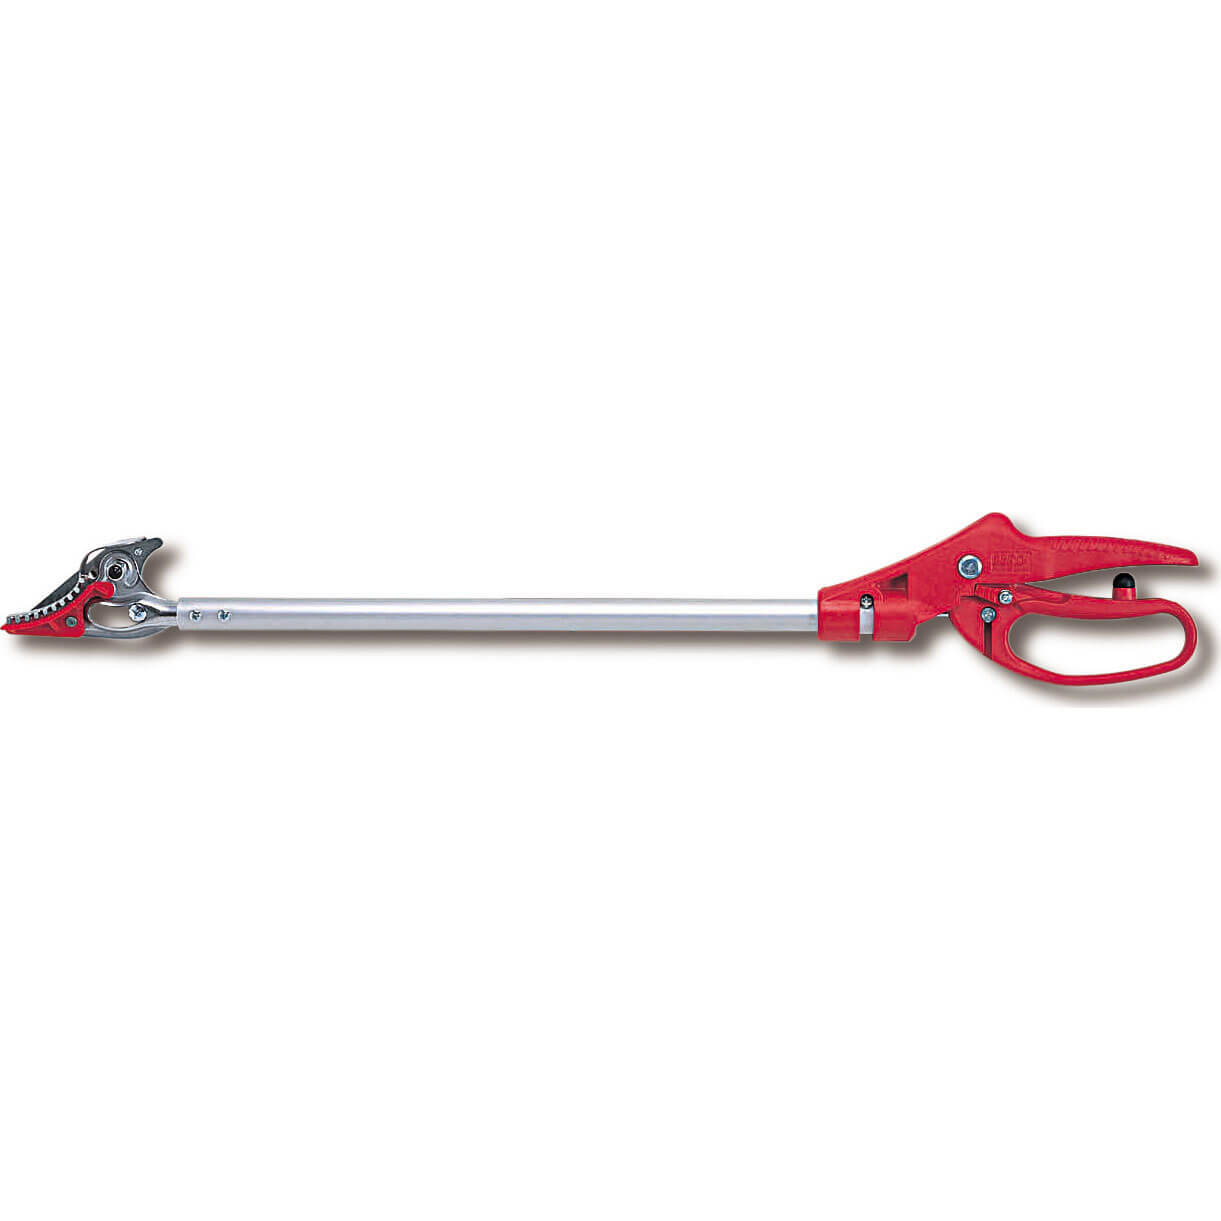 Image of ARS 150-0.6 Long Reach Cut and Hold Rose Pruner 617mm